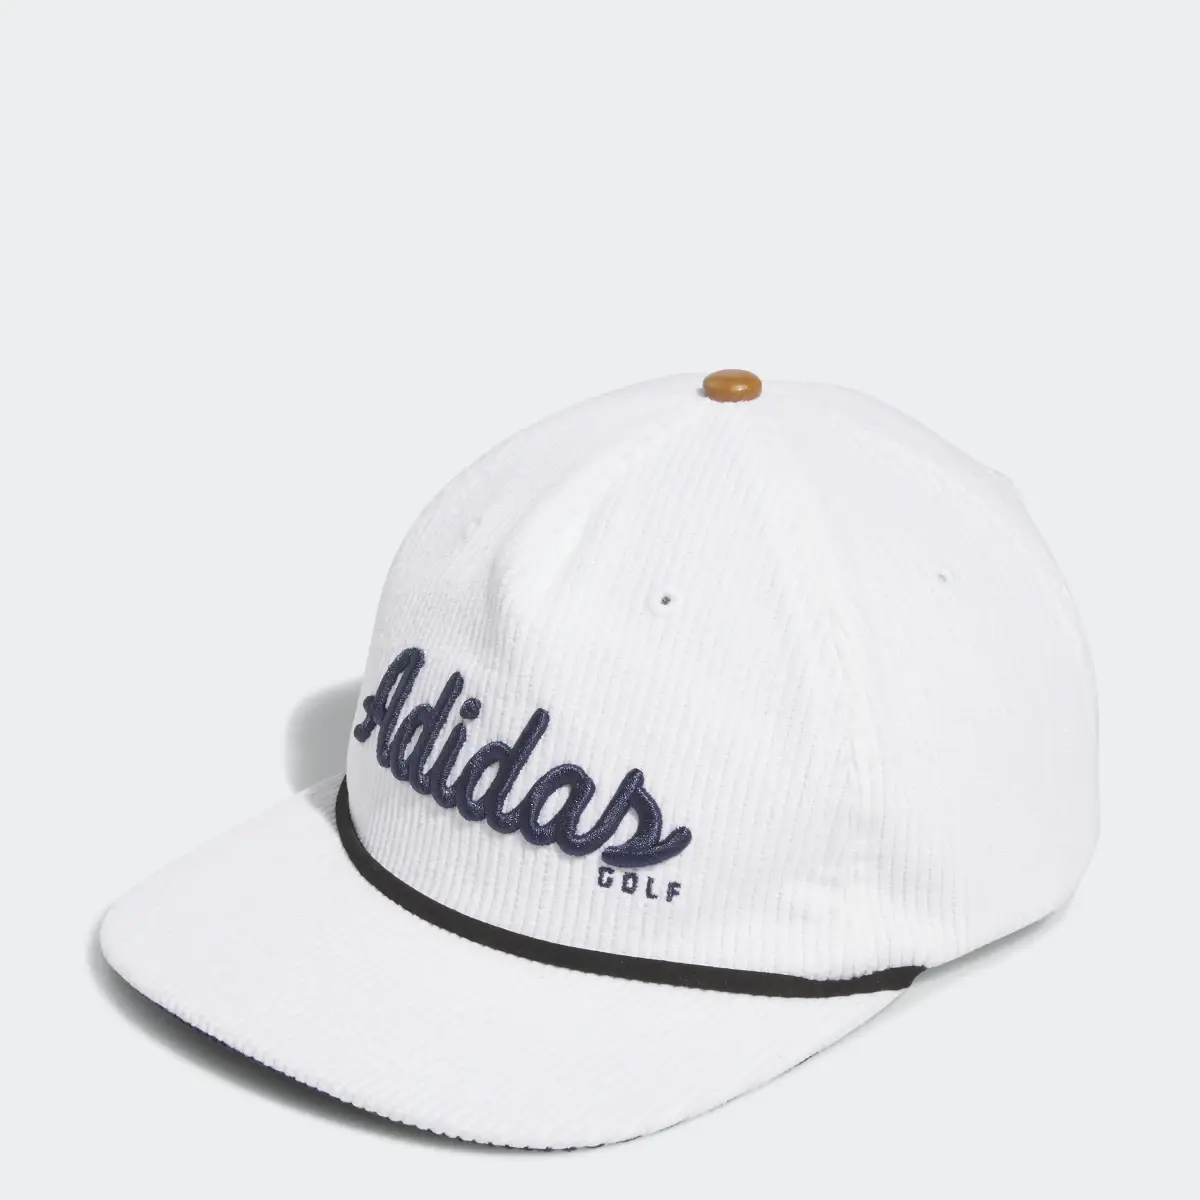 Adidas Corduroy Leather Five-Panel Rope Hat. 1